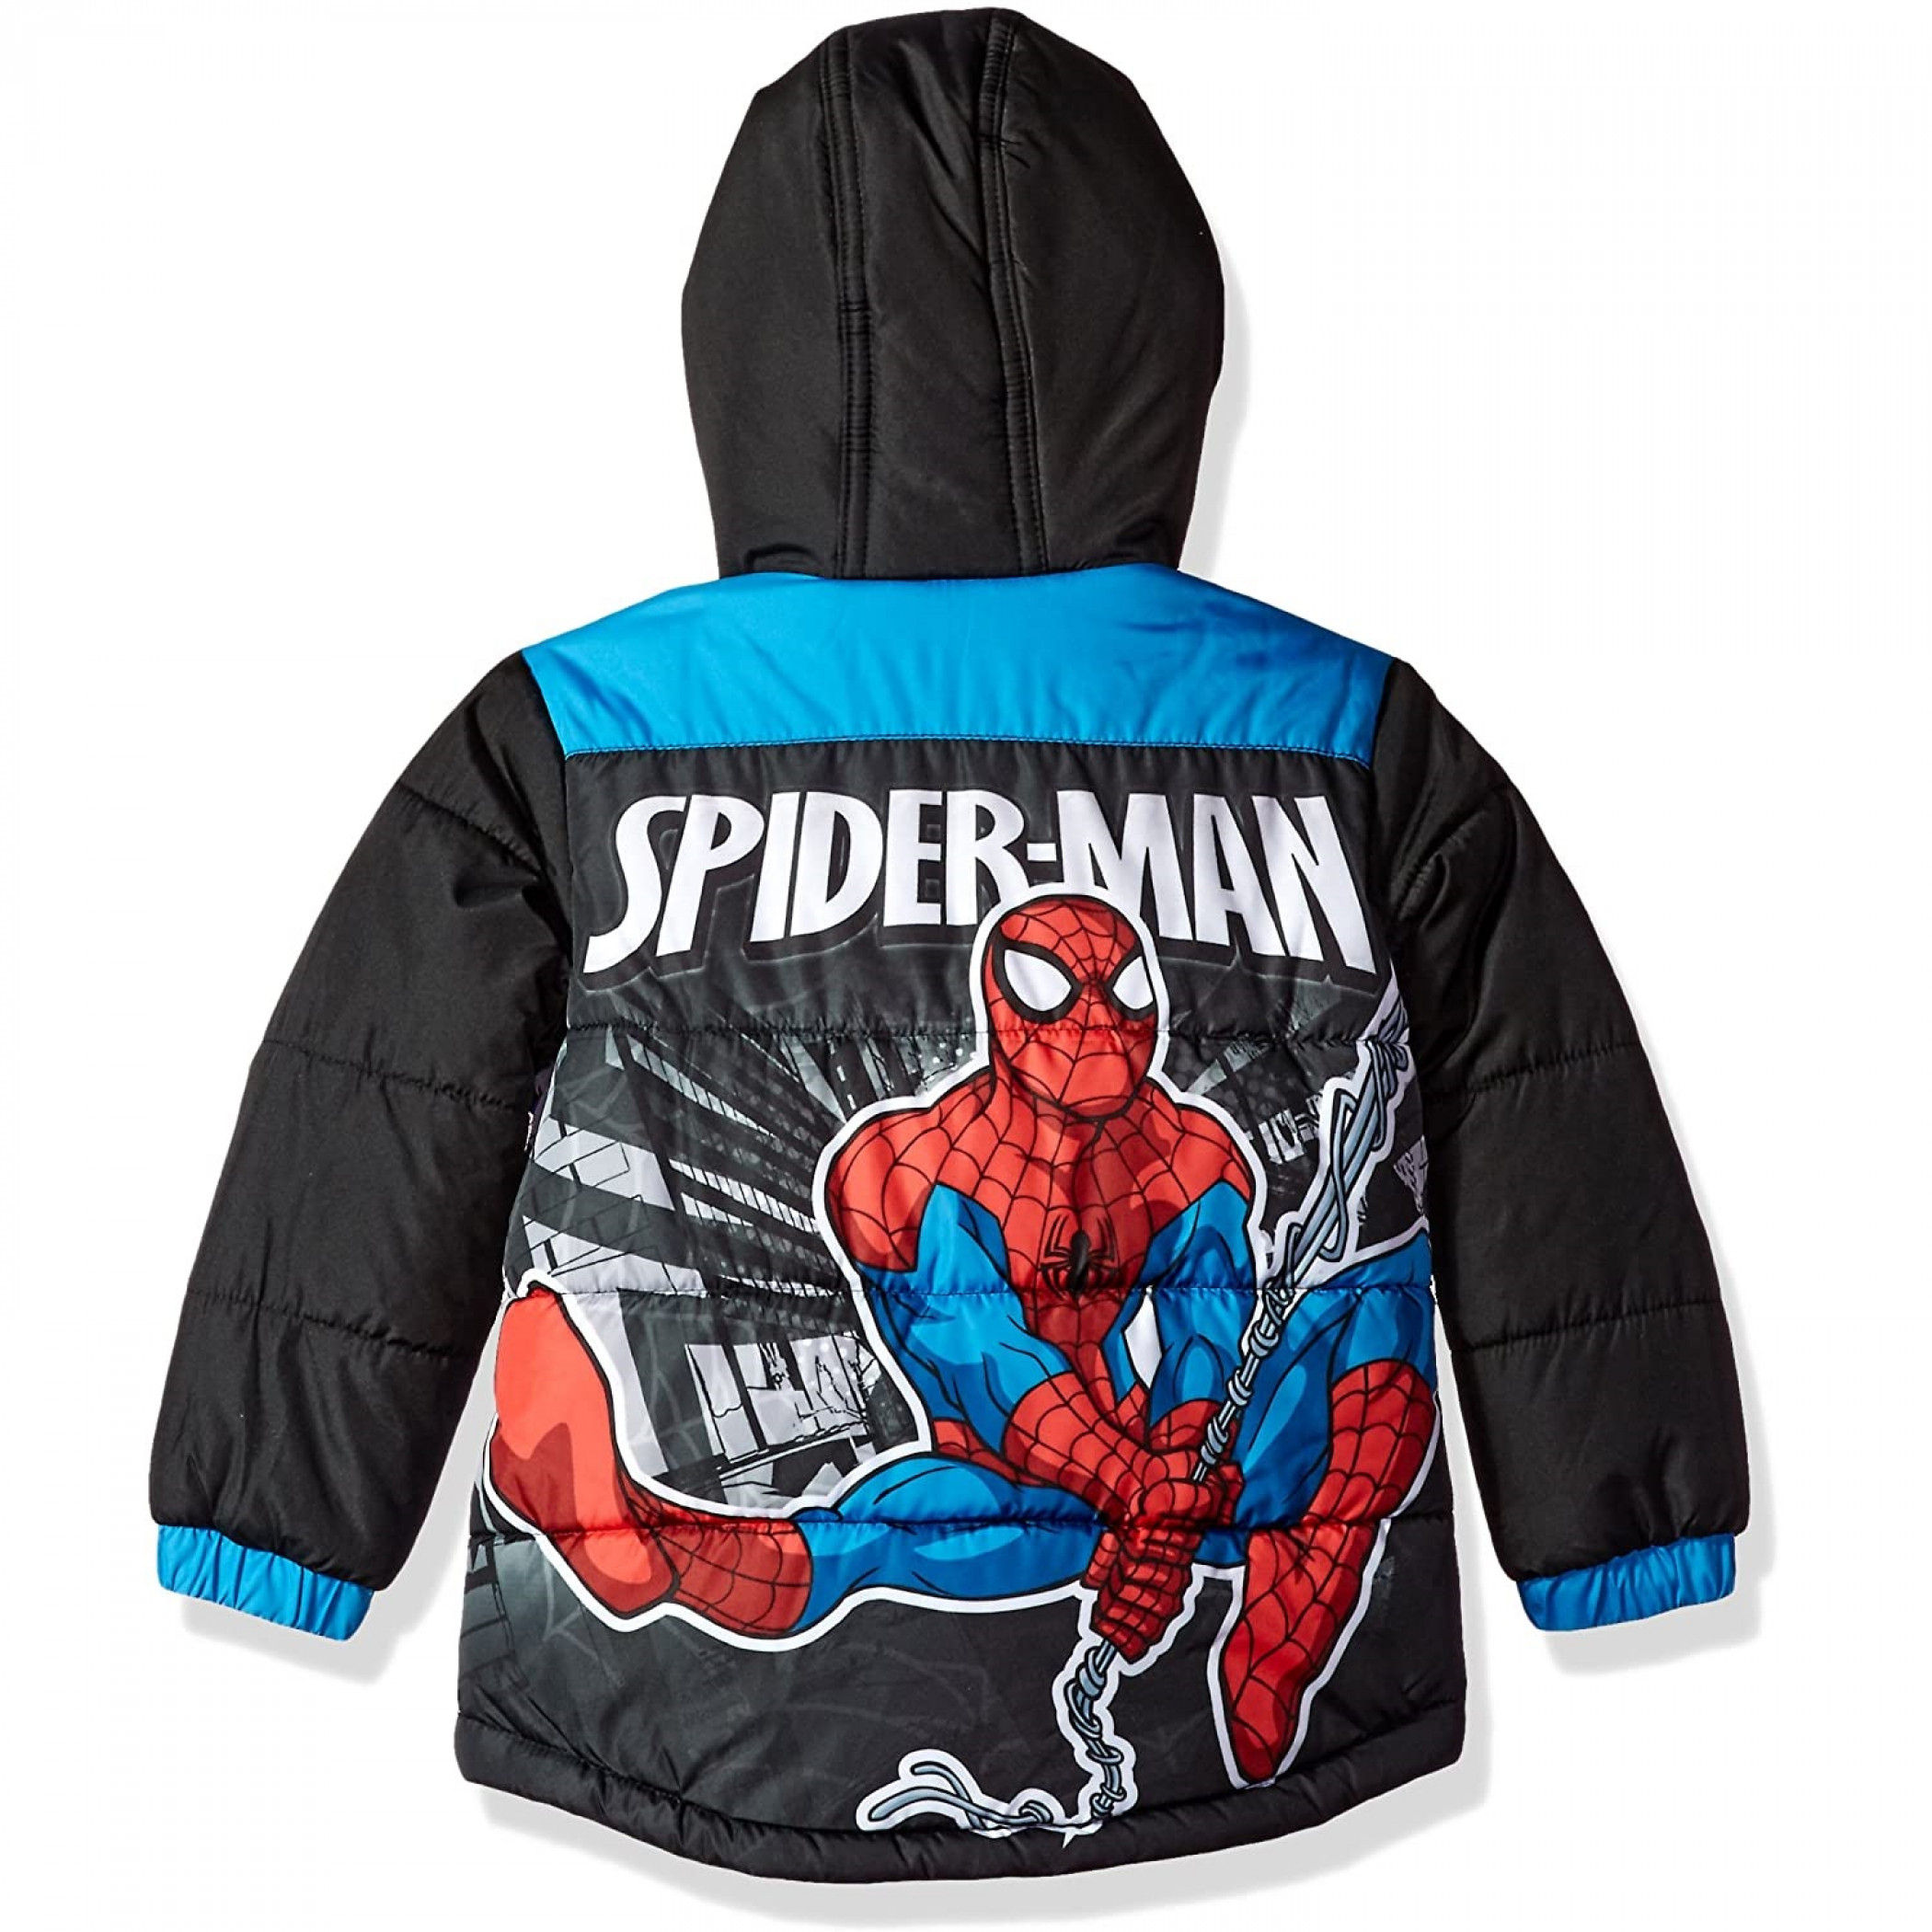 Spider-Man Character Toddler Puffer Coat